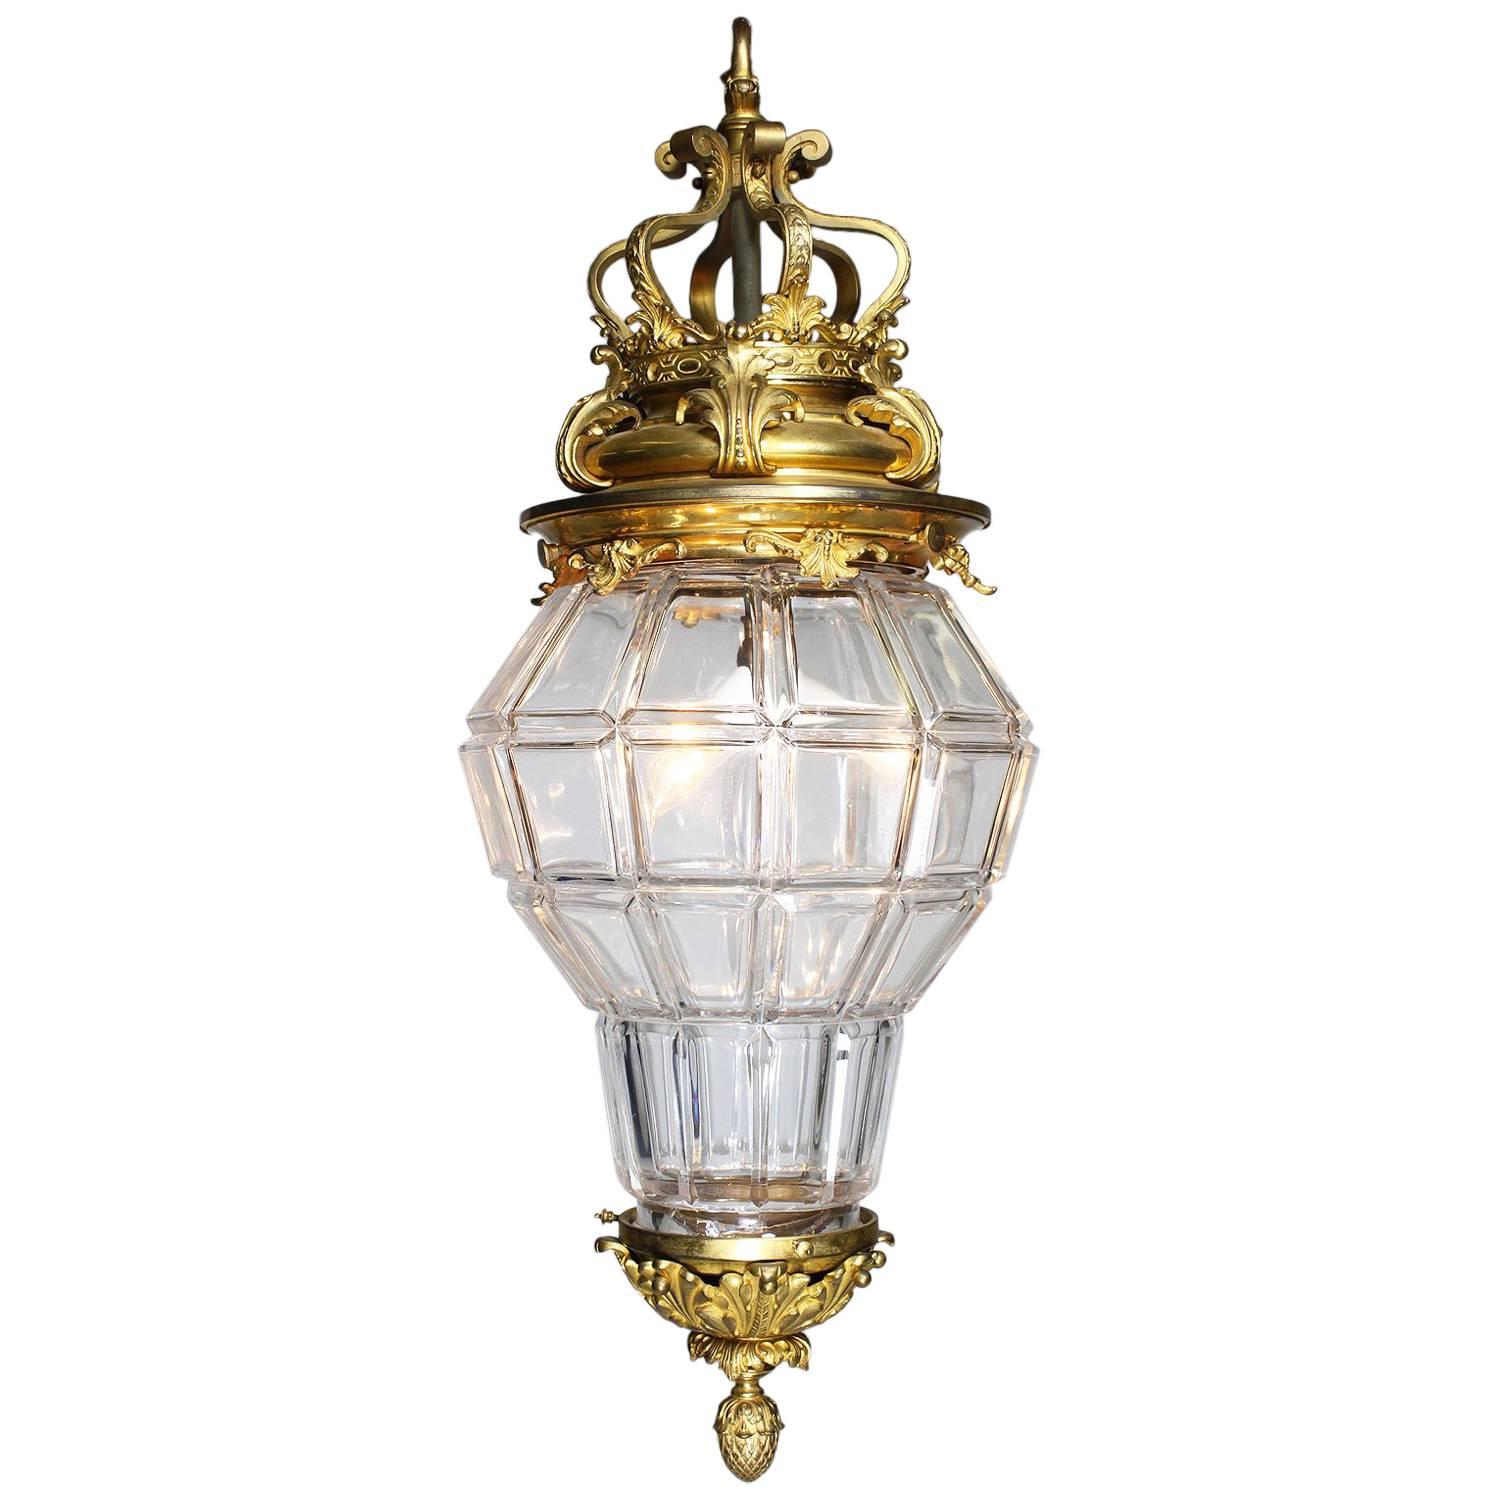 French 19-20th Century Gilt-Bronze & Molded Cut-Glass "Versailles" Style Lantern For Sale